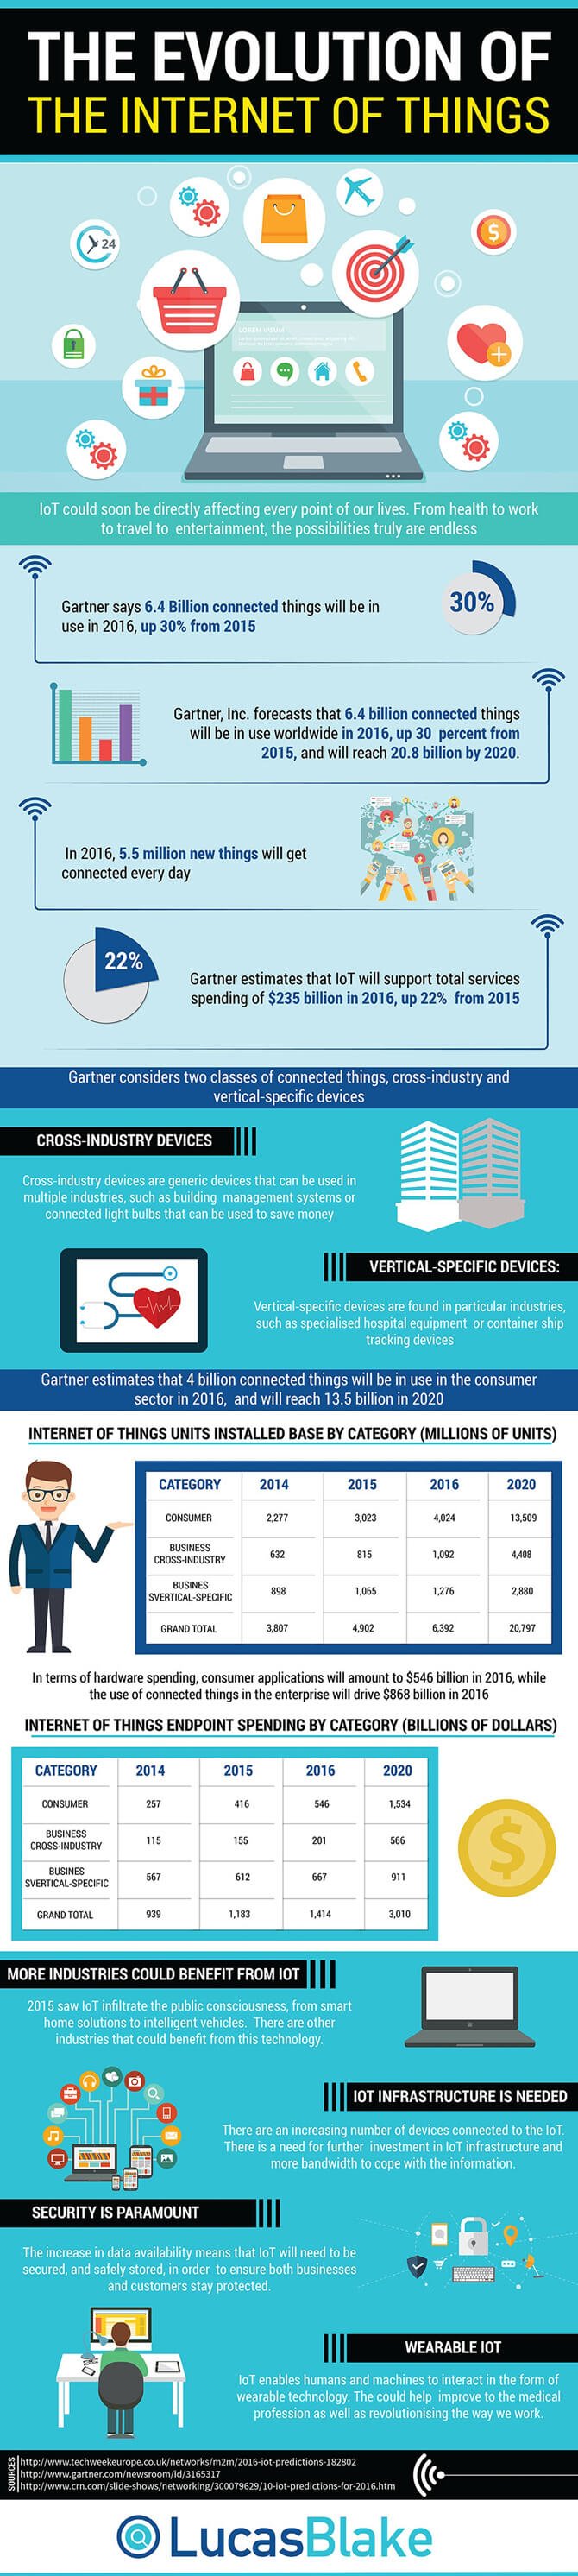 The Evolution of the Internet of Things [Infographic]